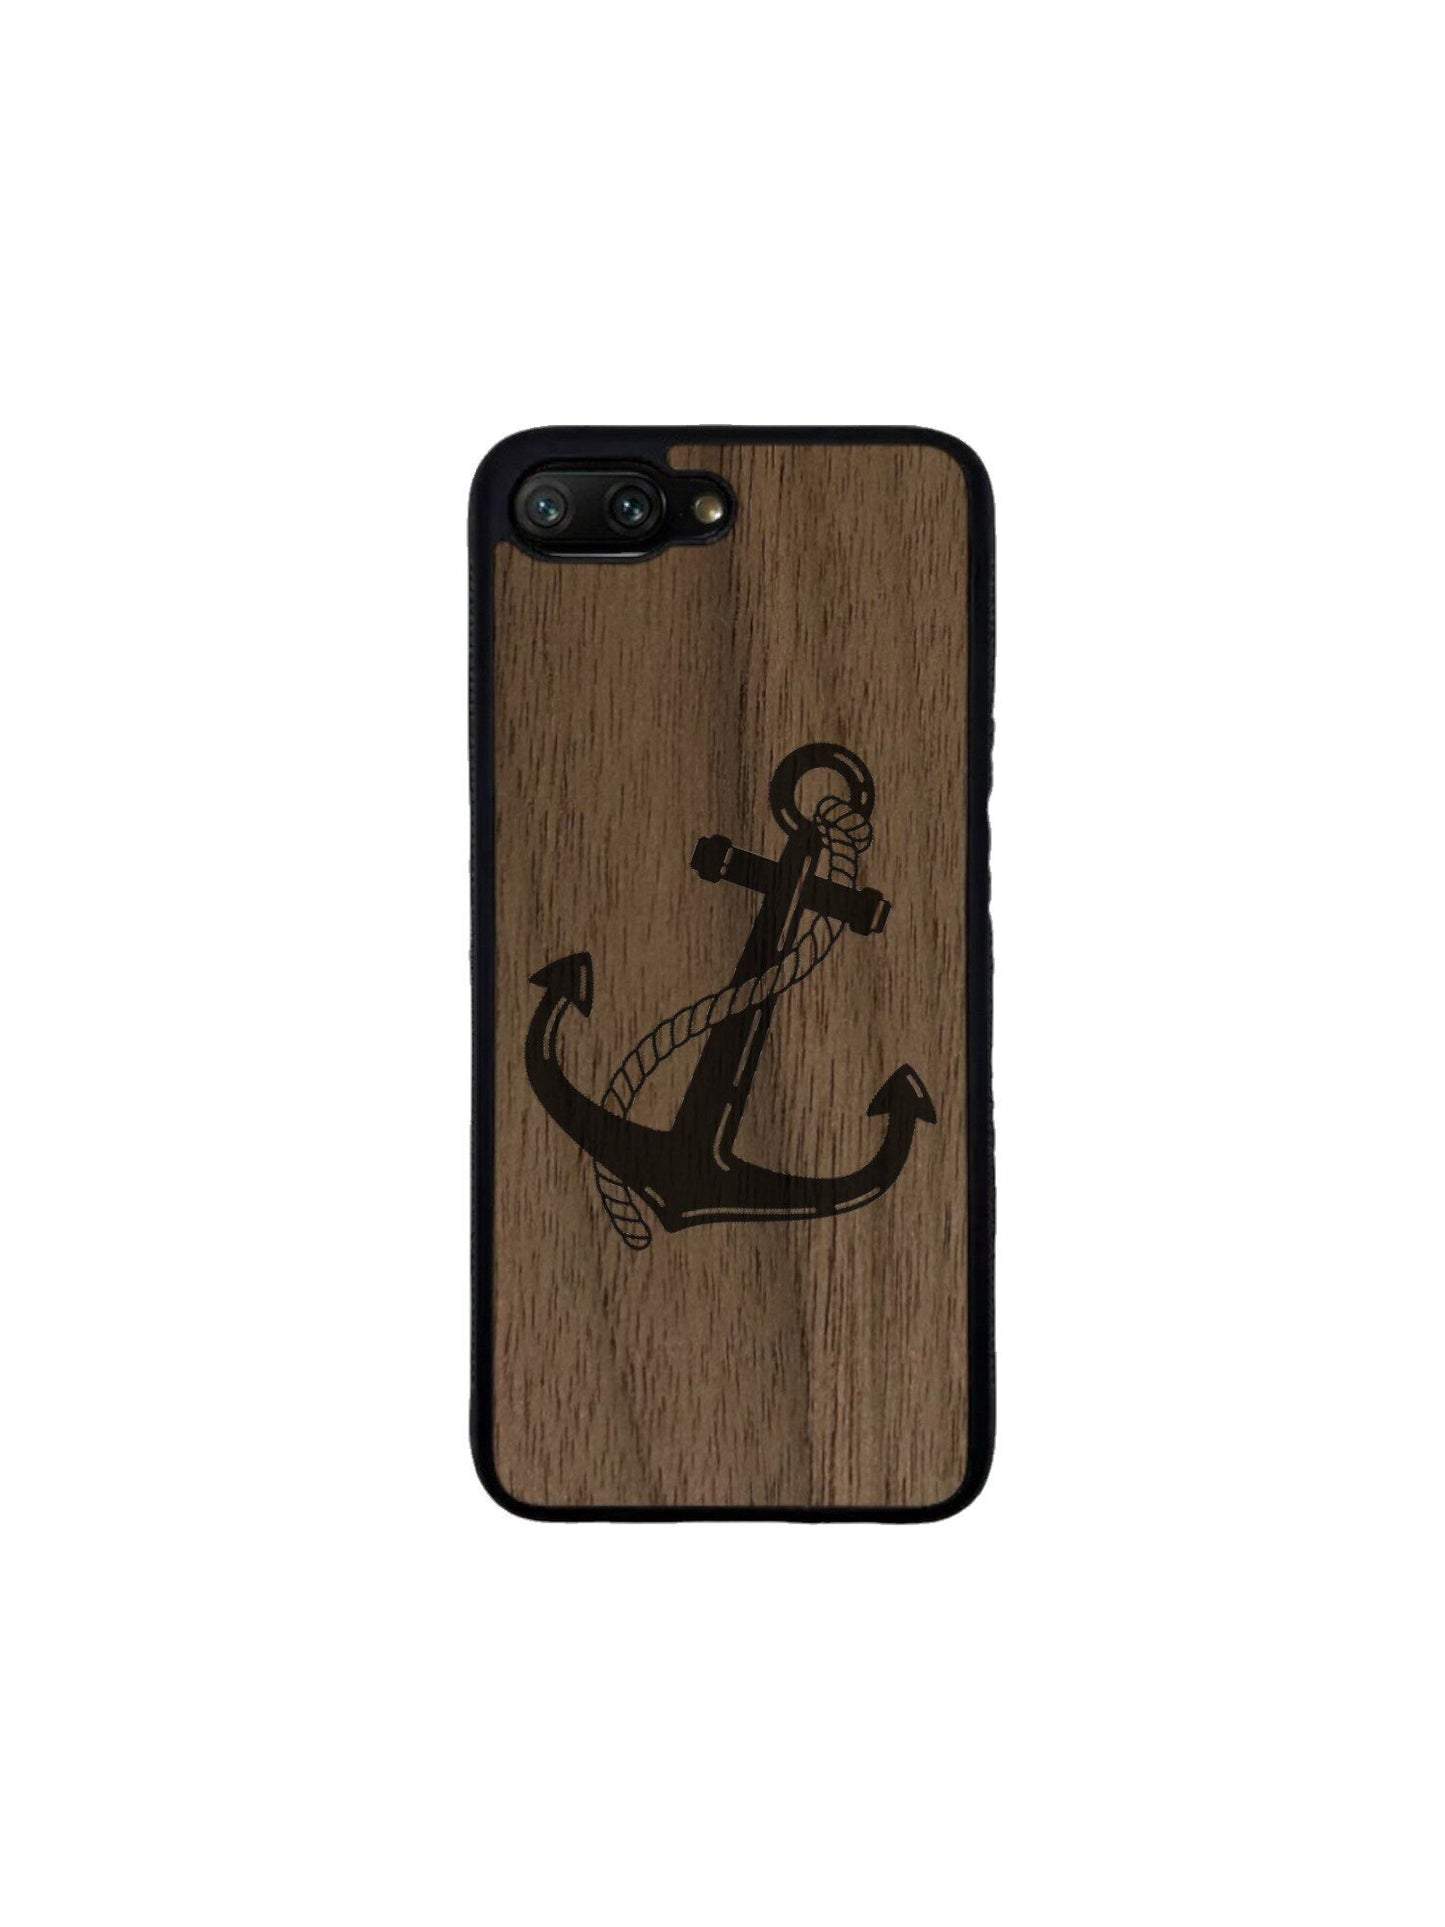 Huawei Honor Case - Boat Anchor